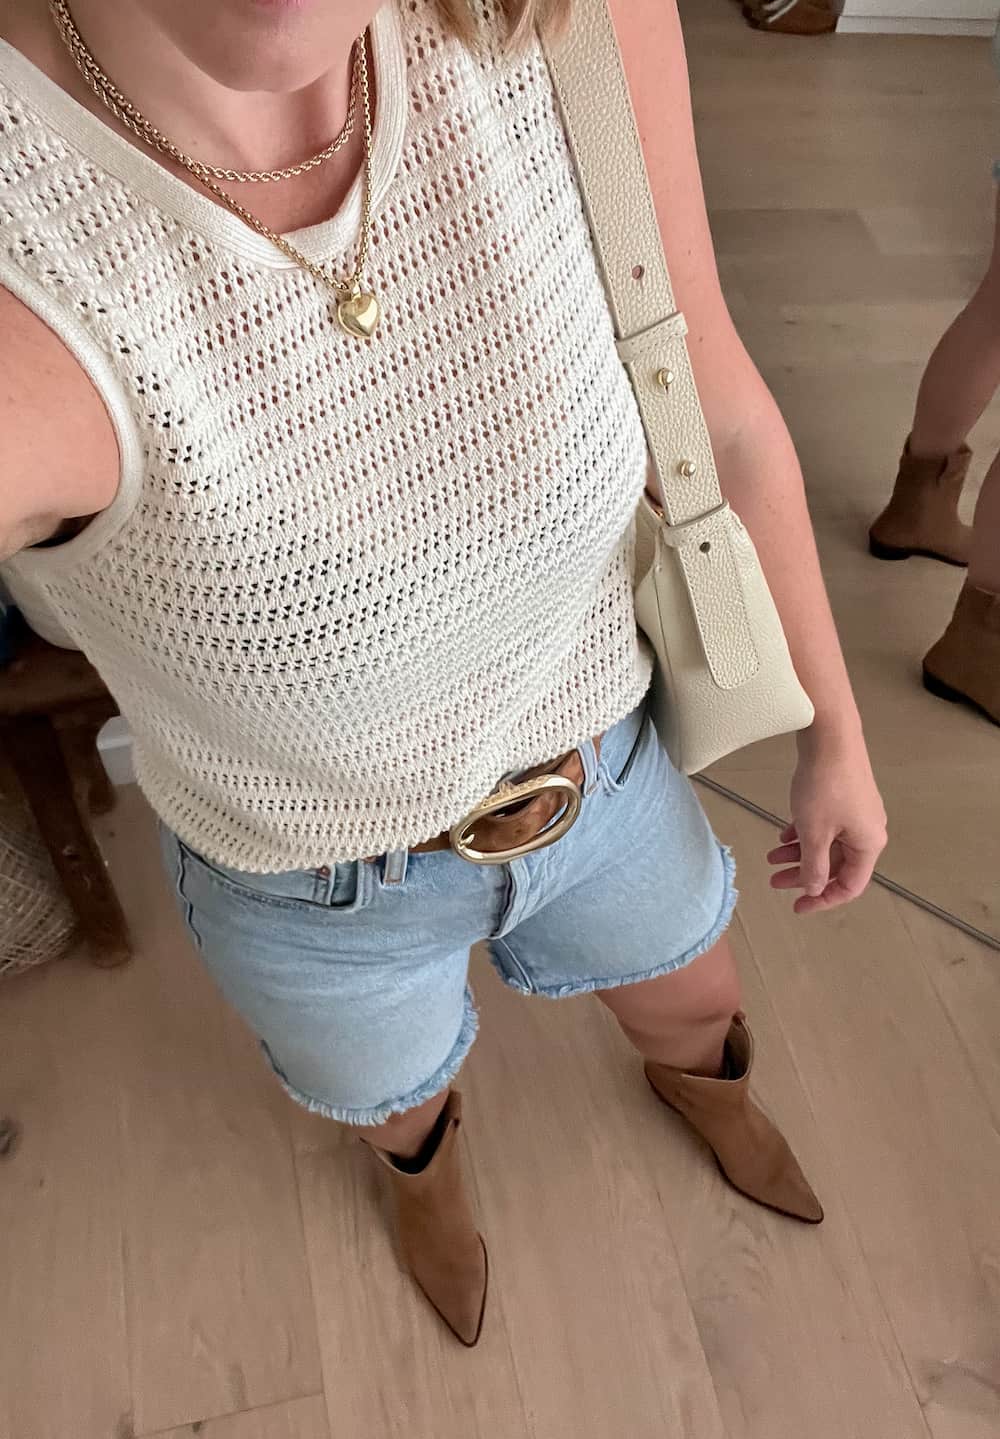 woman wearing a rodeo outfit with a crochet tank top, suede belt with gold buckle, denim shorts, and brown suede western boots